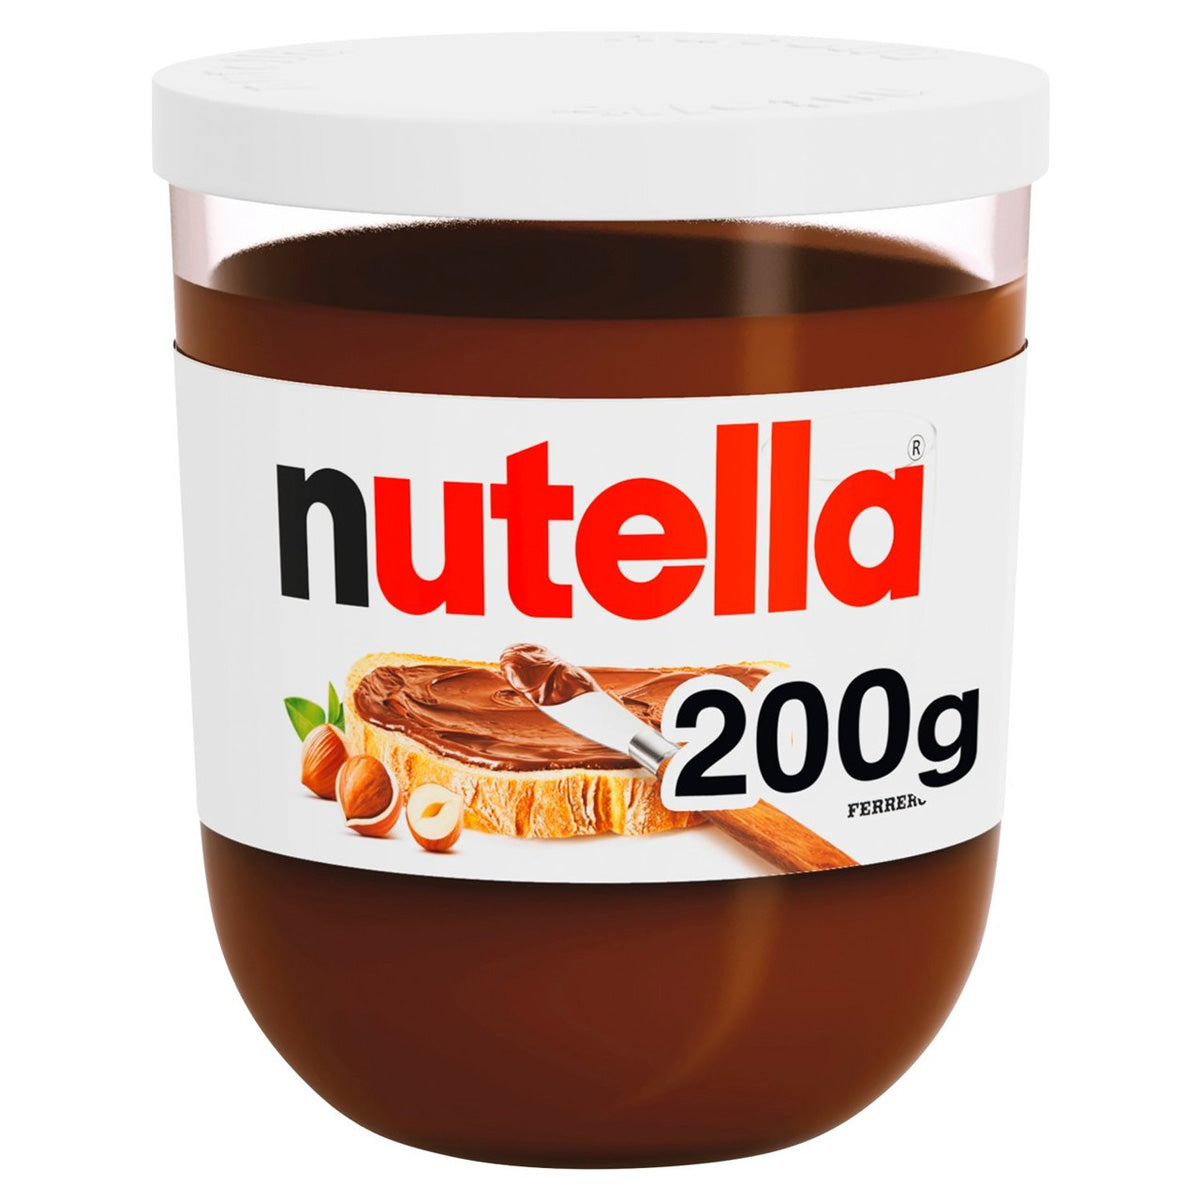 Nutella - Hazelnut Spread with Cocoa - 200g jar on a white background.